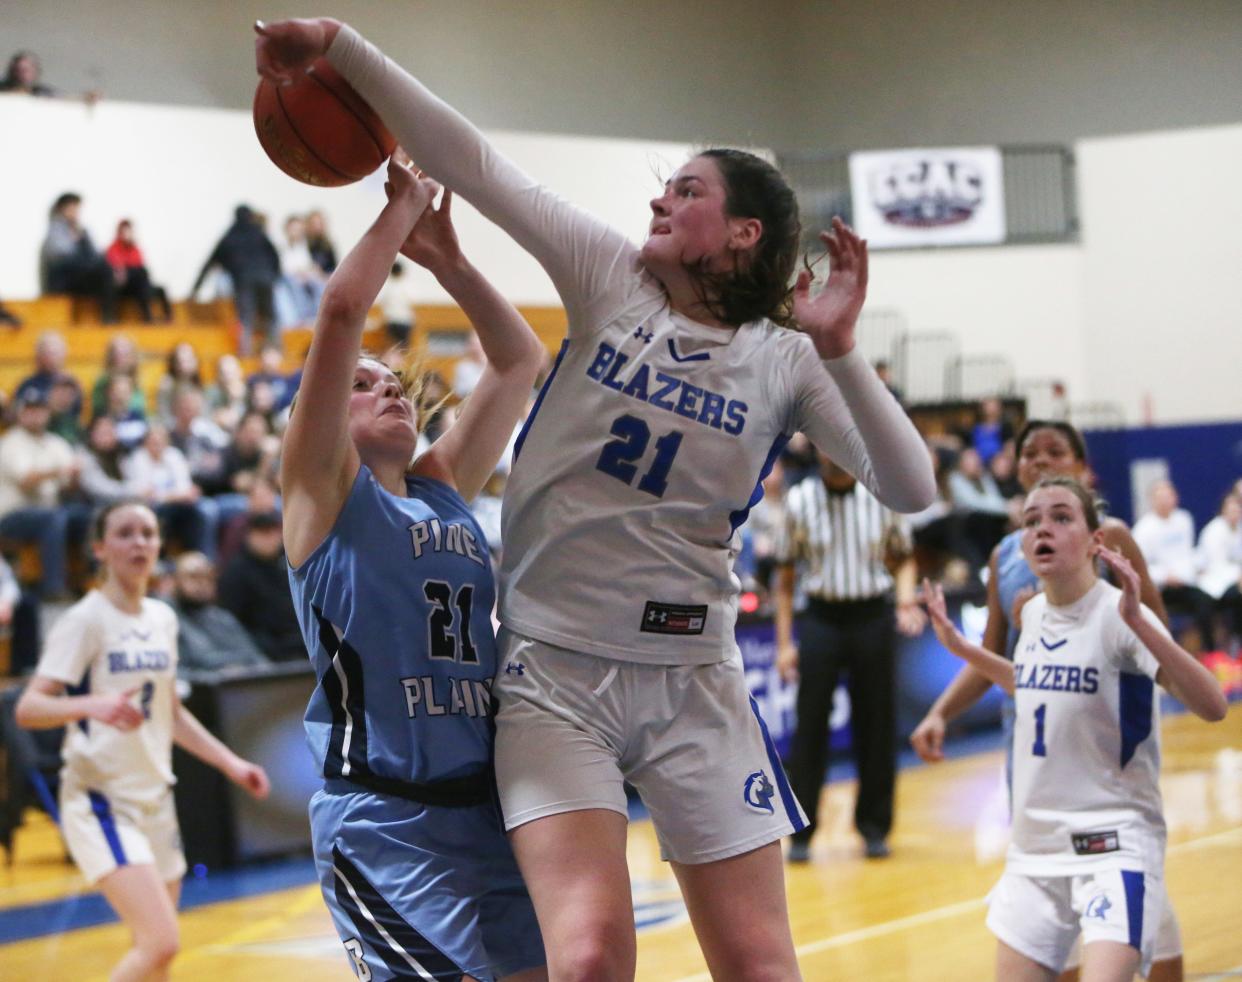 Millbrook's Natalie Fox blocks a shot from Pine Plains' Elizabeth Hieter during the Section 9 Class C girls basketball championship on February 28, 2024.